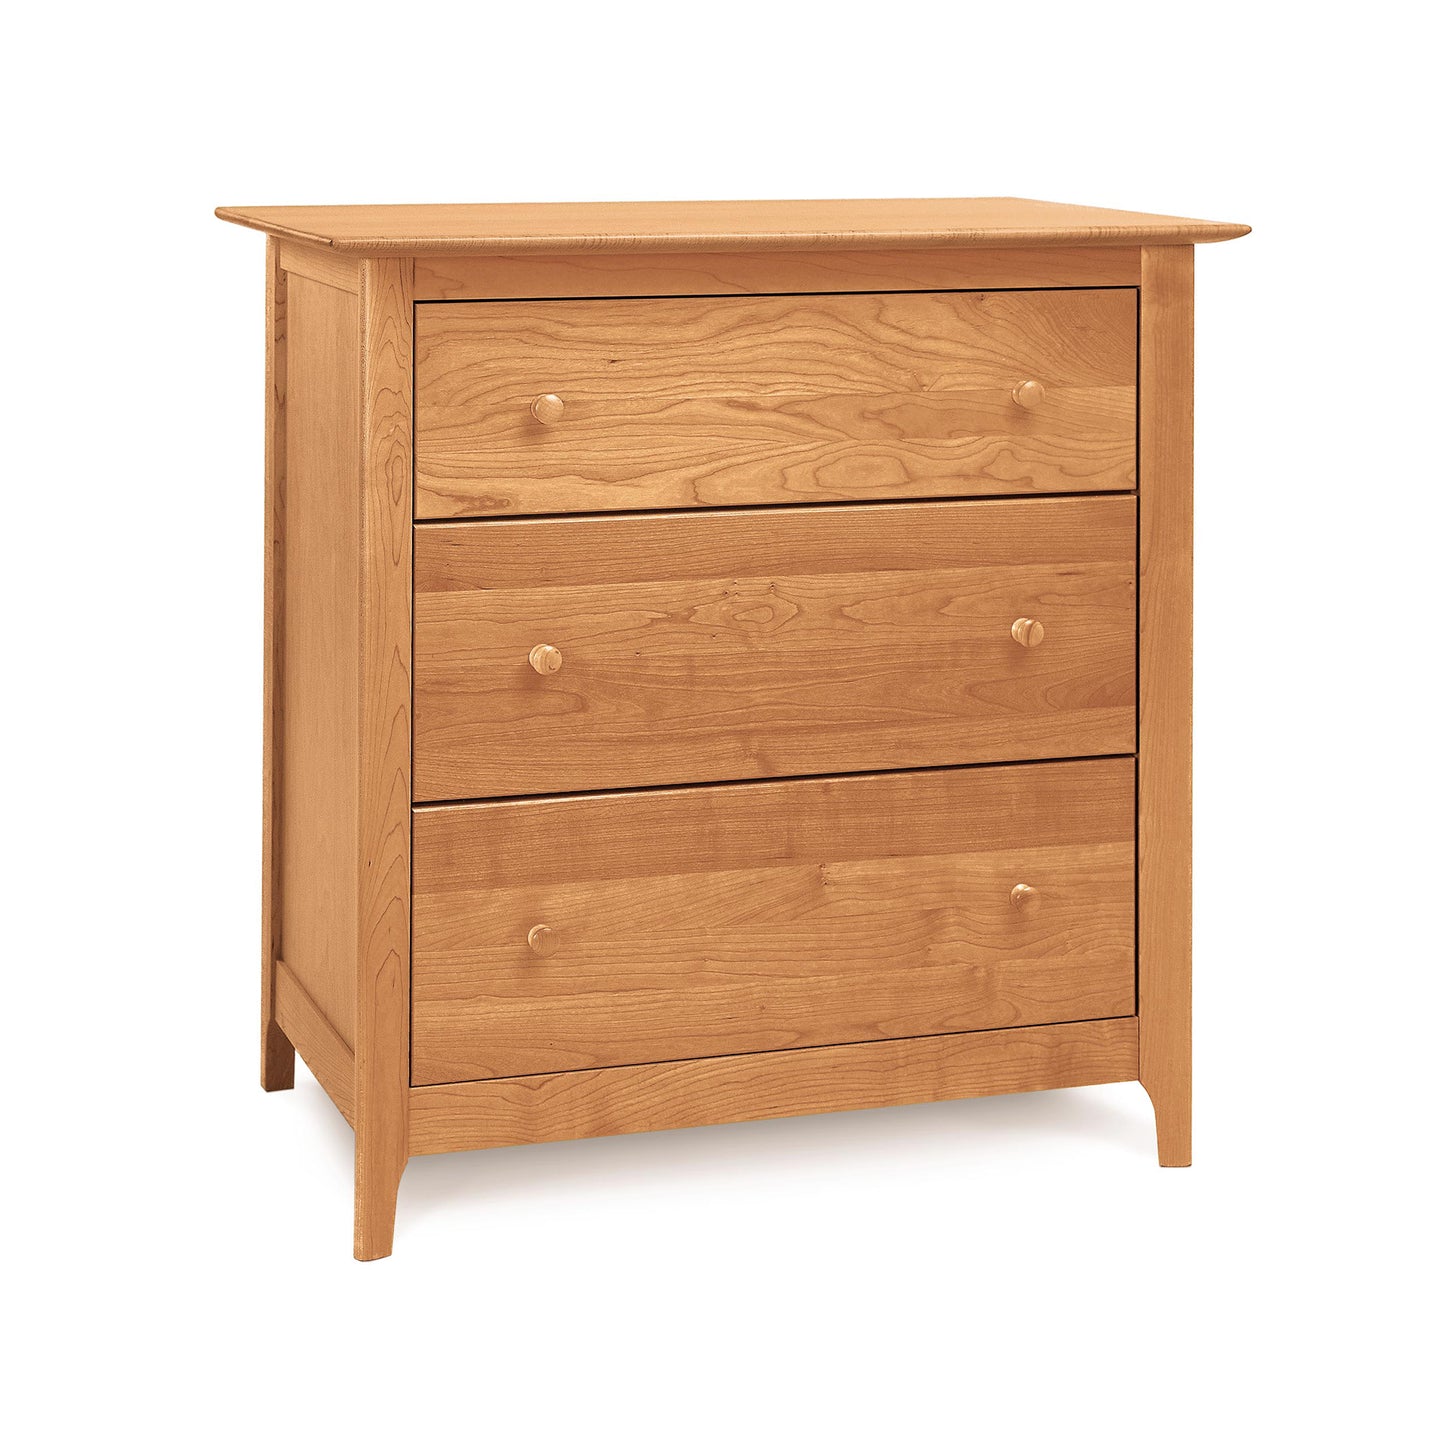 A handmade, wooden Sarah 3-Drawer Chest in natural cherry wood on a white background by Copeland Furniture.